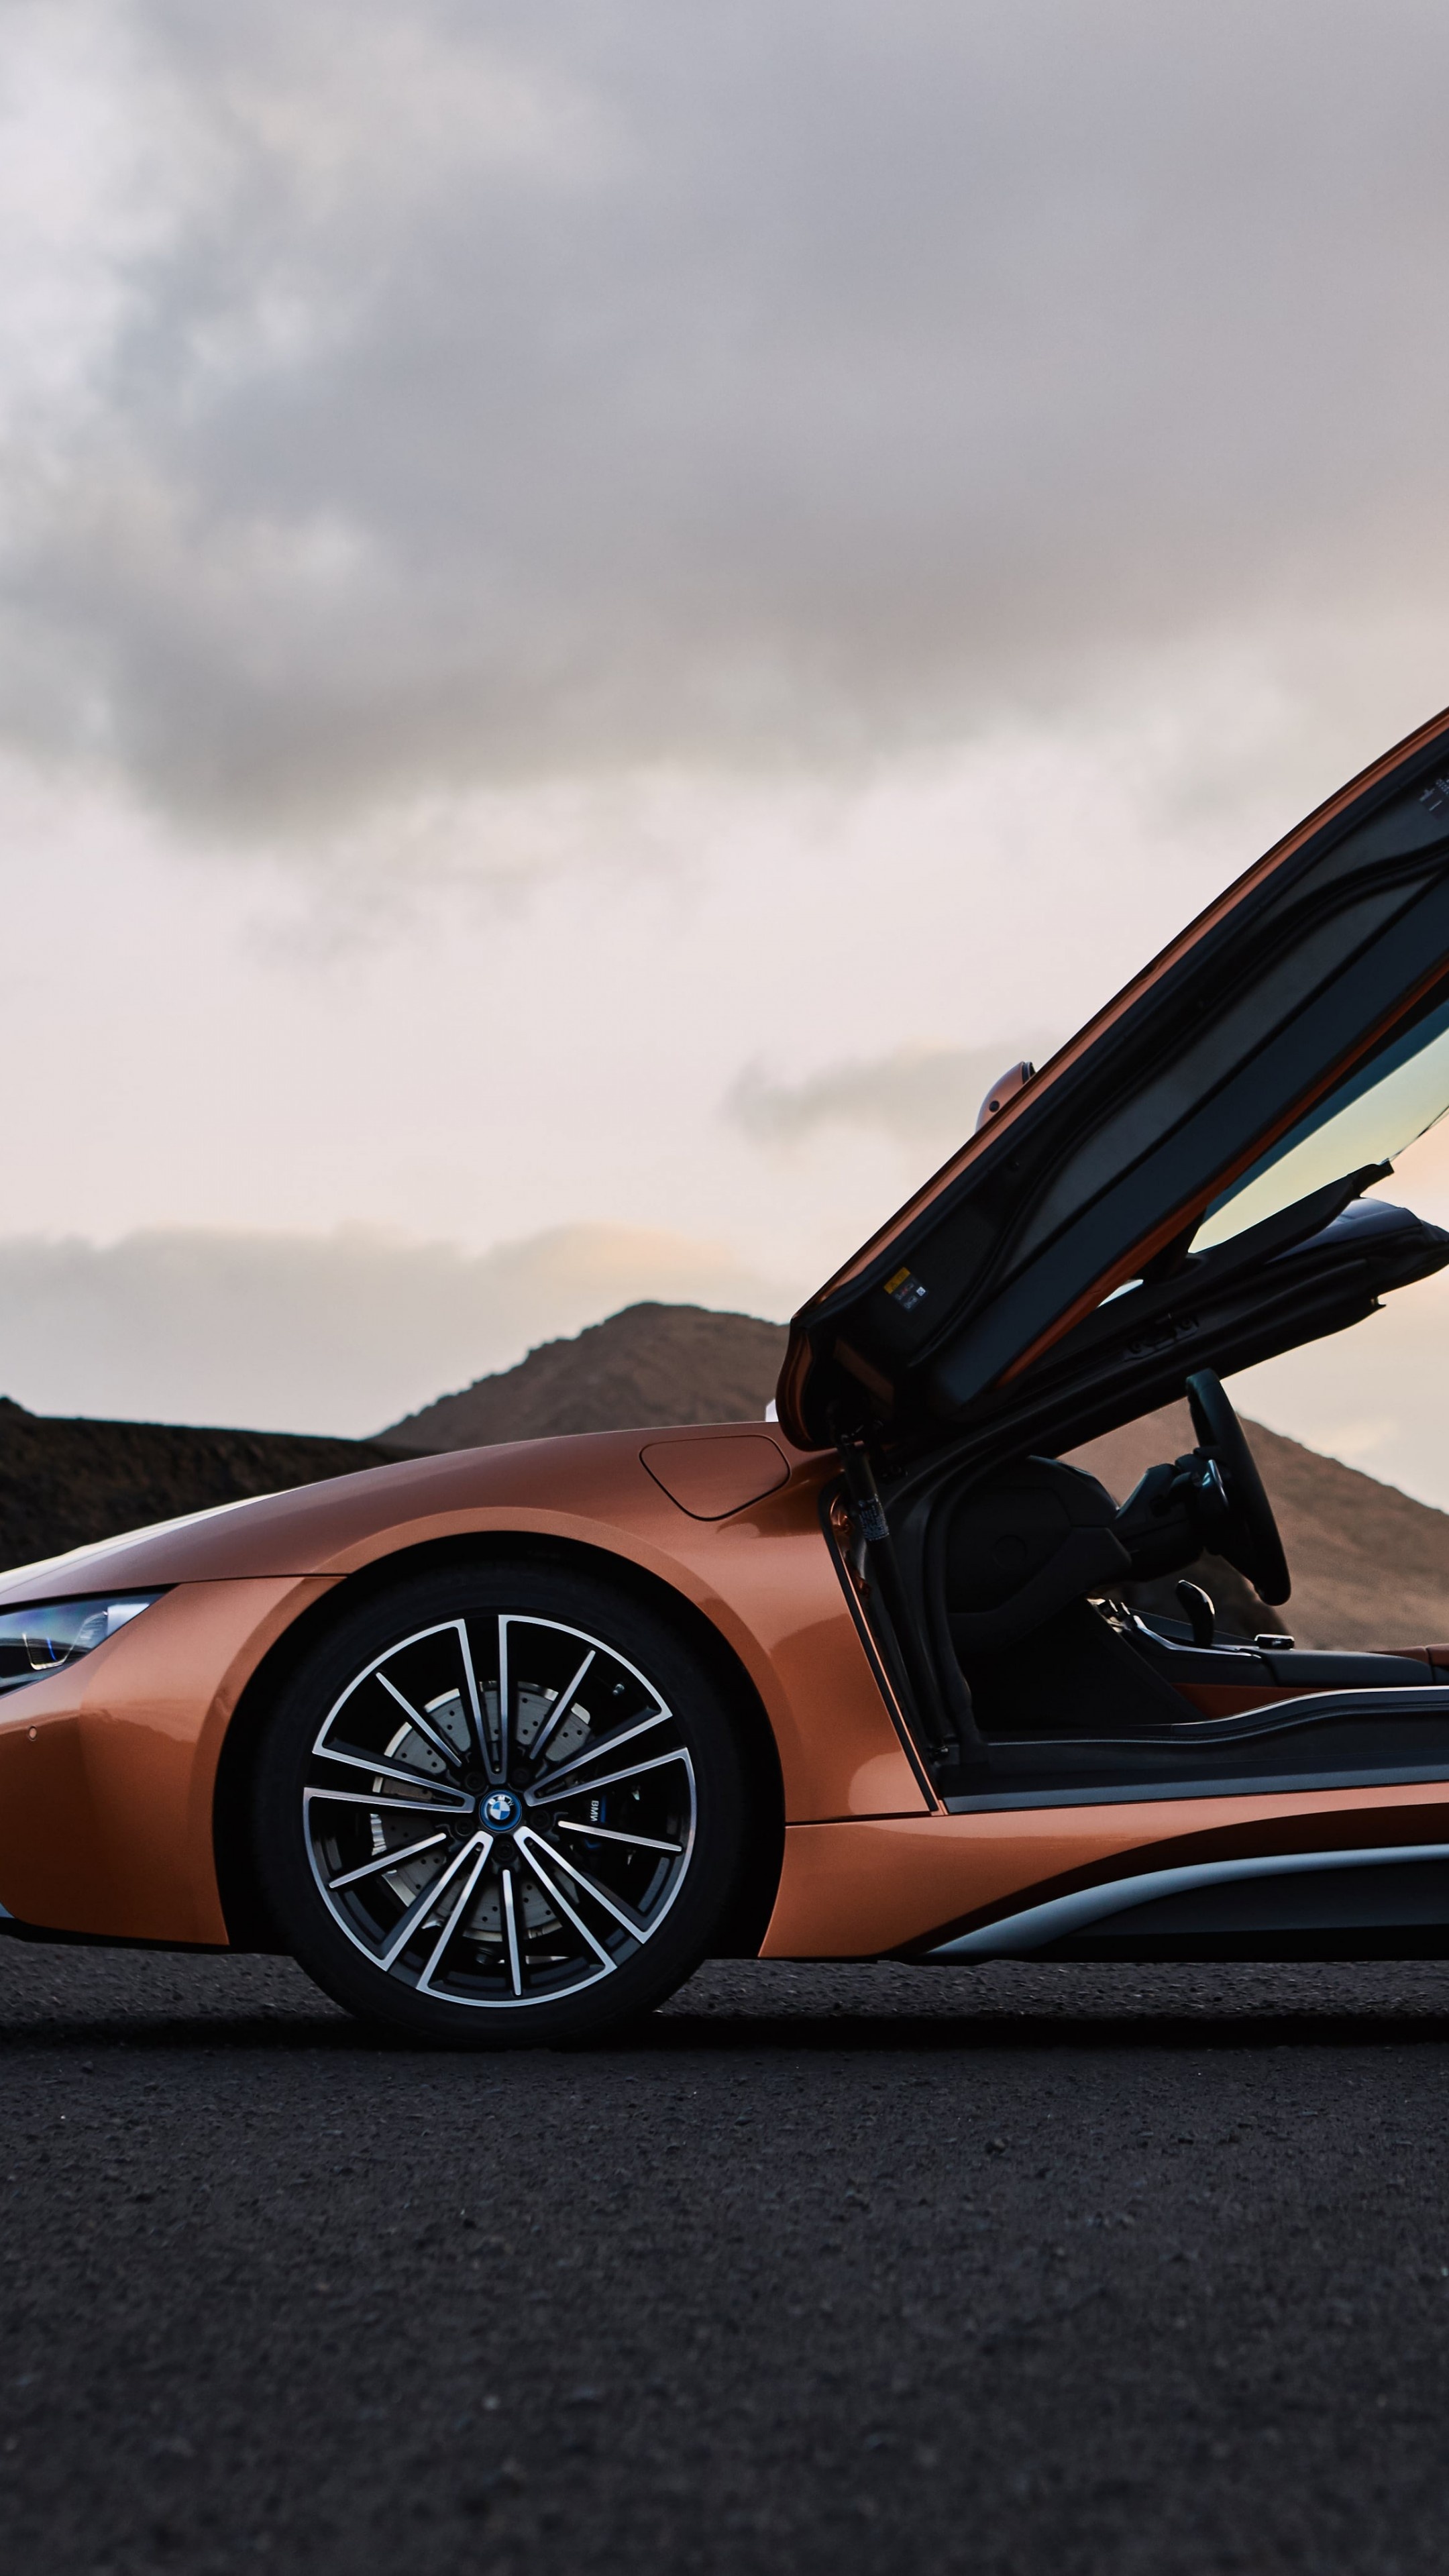 BMW i8, Roadster beauty, Open-top luxury, Unmatched performance, Jaw-dropping design, 2160x3840 4K Phone